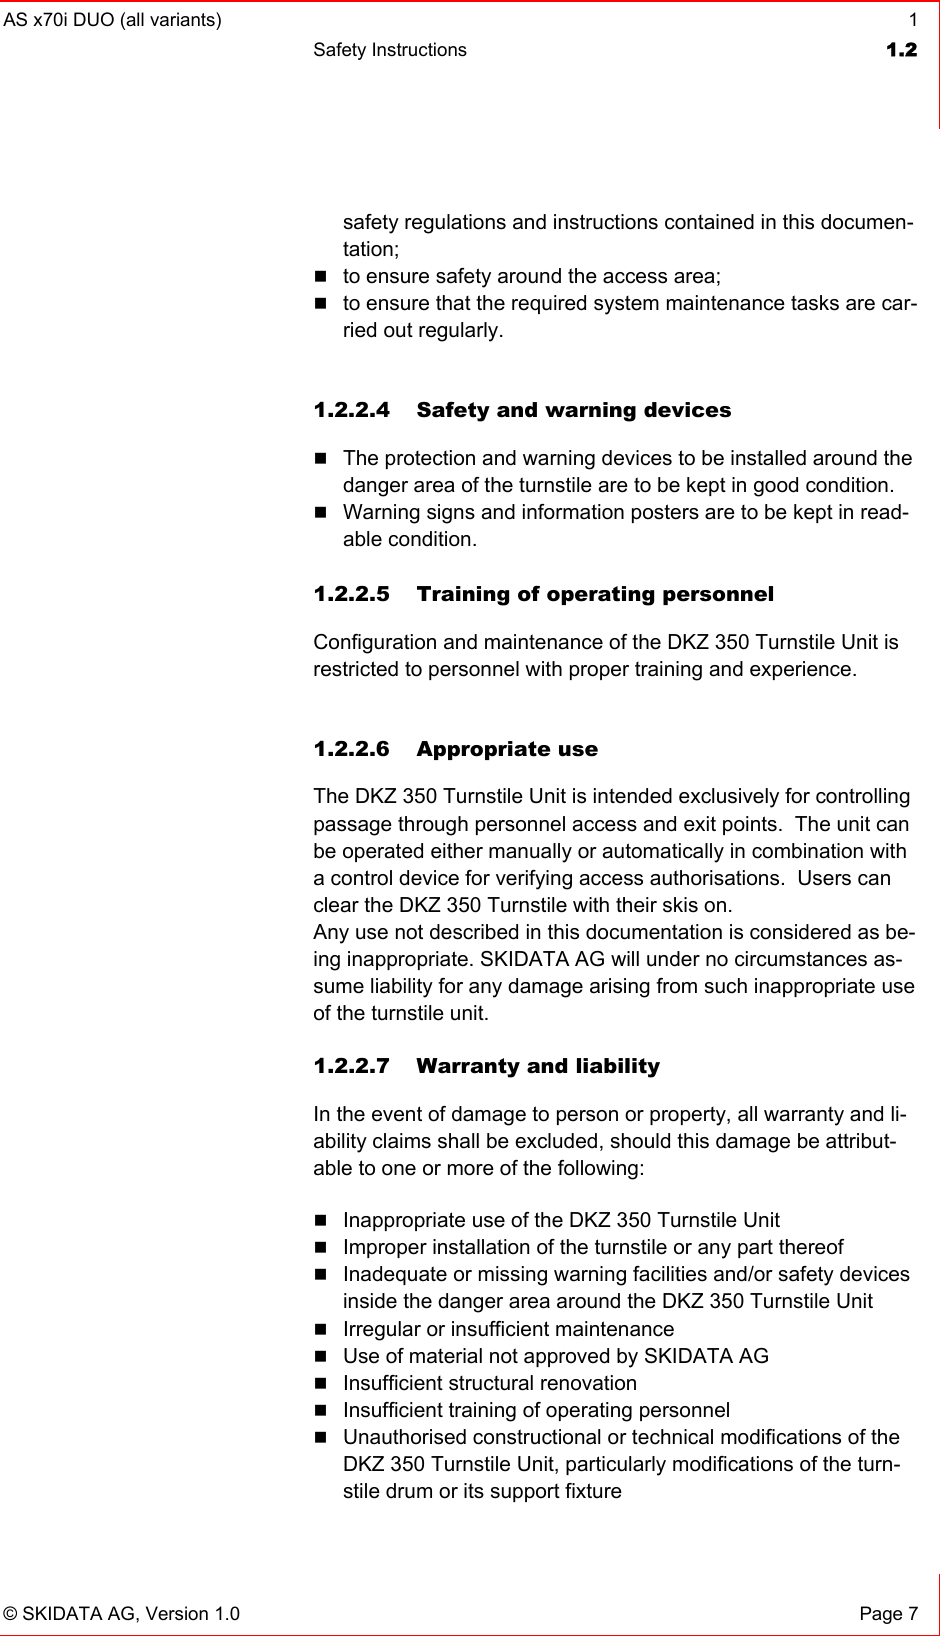 AS x70i DUO (all variants)  1 Safety Instructions  1.2   © SKIDATA AG, Version 1.0  Page 7 safety regulations and instructions contained in this documen-tation;  to ensure safety around the access area;  to ensure that the required system maintenance tasks are car-ried out regularly.  1.2.2.4  Safety and warning devices  The protection and warning devices to be installed around the danger area of the turnstile are to be kept in good condition.  Warning signs and information posters are to be kept in read-able condition.  1.2.2.5 Training of operating personnel Configuration and maintenance of the DKZ 350 Turnstile Unit is restricted to personnel with proper training and experience.  1.2.2.6 Appropriate use The DKZ 350 Turnstile Unit is intended exclusively for controlling passage through personnel access and exit points.  The unit can be operated either manually or automatically in combination with a control device for verifying access authorisations.  Users can clear the DKZ 350 Turnstile with their skis on. Any use not described in this documentation is considered as be-ing inappropriate. SKIDATA AG will under no circumstances as-sume liability for any damage arising from such inappropriate use of the turnstile unit. 1.2.2.7  Warranty and liability In the event of damage to person or property, all warranty and li-ability claims shall be excluded, should this damage be attribut-able to one or more of the following:  Inappropriate use of the DKZ 350 Turnstile Unit  Improper installation of the turnstile or any part thereof  Inadequate or missing warning facilities and/or safety devices inside the danger area around the DKZ 350 Turnstile Unit  Irregular or insufficient maintenance  Use of material not approved by SKIDATA AG  Insufficient structural renovation  Insufficient training of operating personnel  Unauthorised constructional or technical modifications of the DKZ 350 Turnstile Unit, particularly modifications of the turn-stile drum or its support fixture 